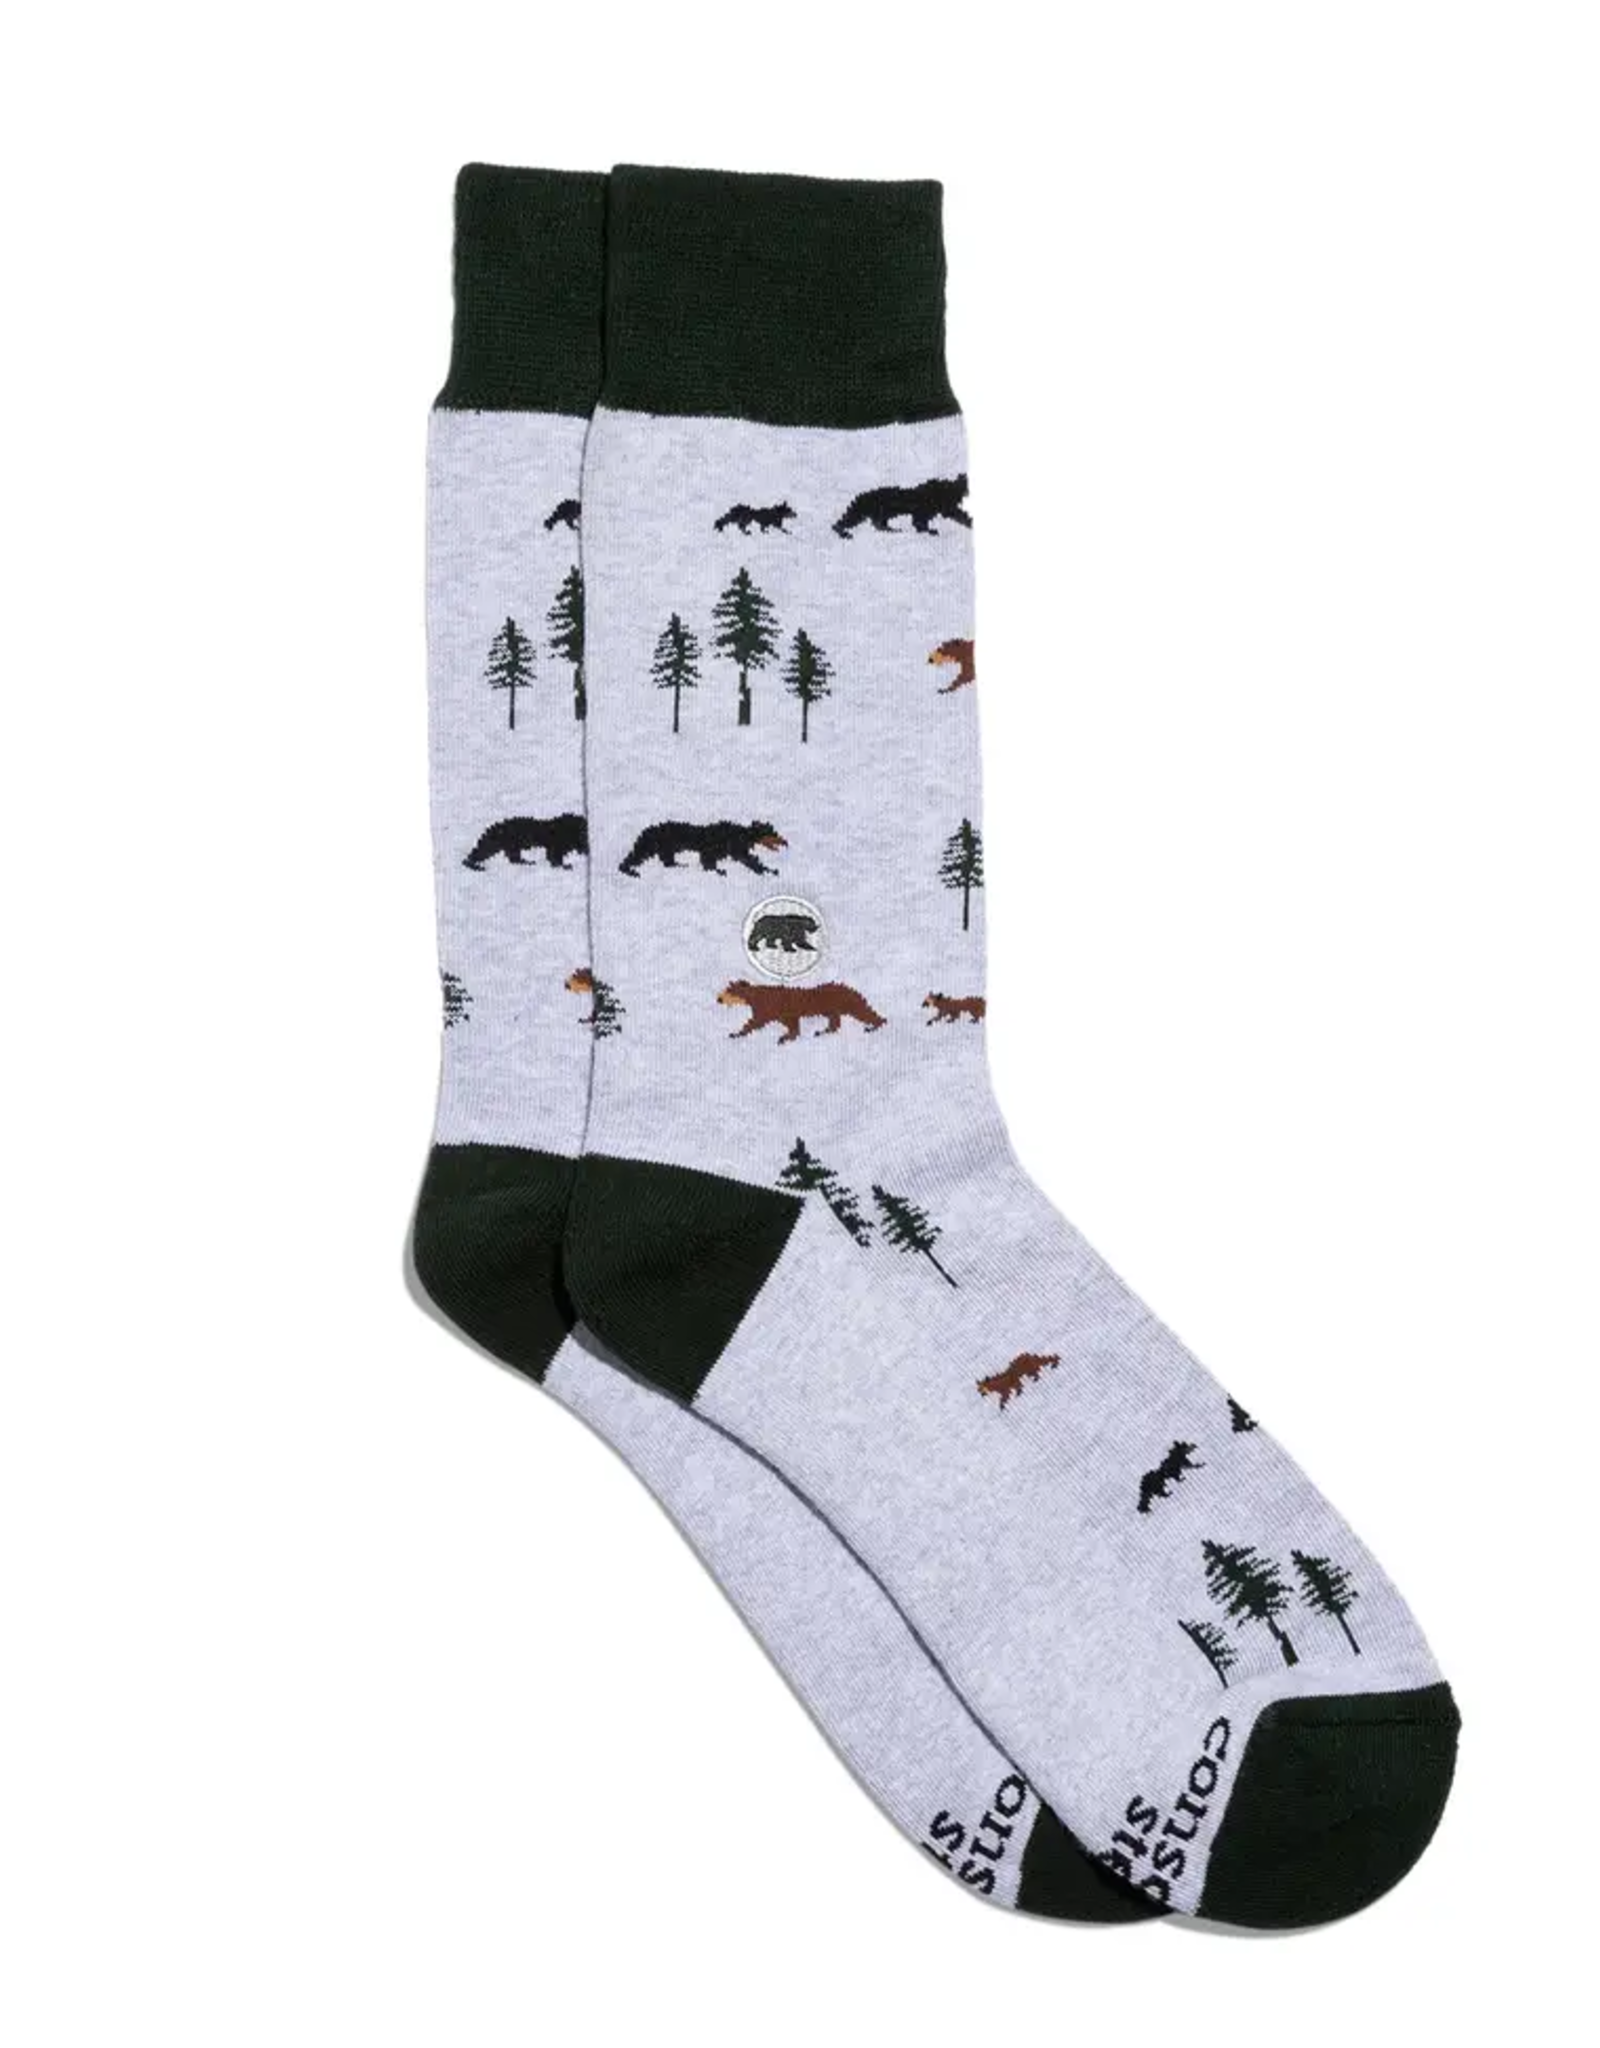 Trade roots Socks that Protect Bears